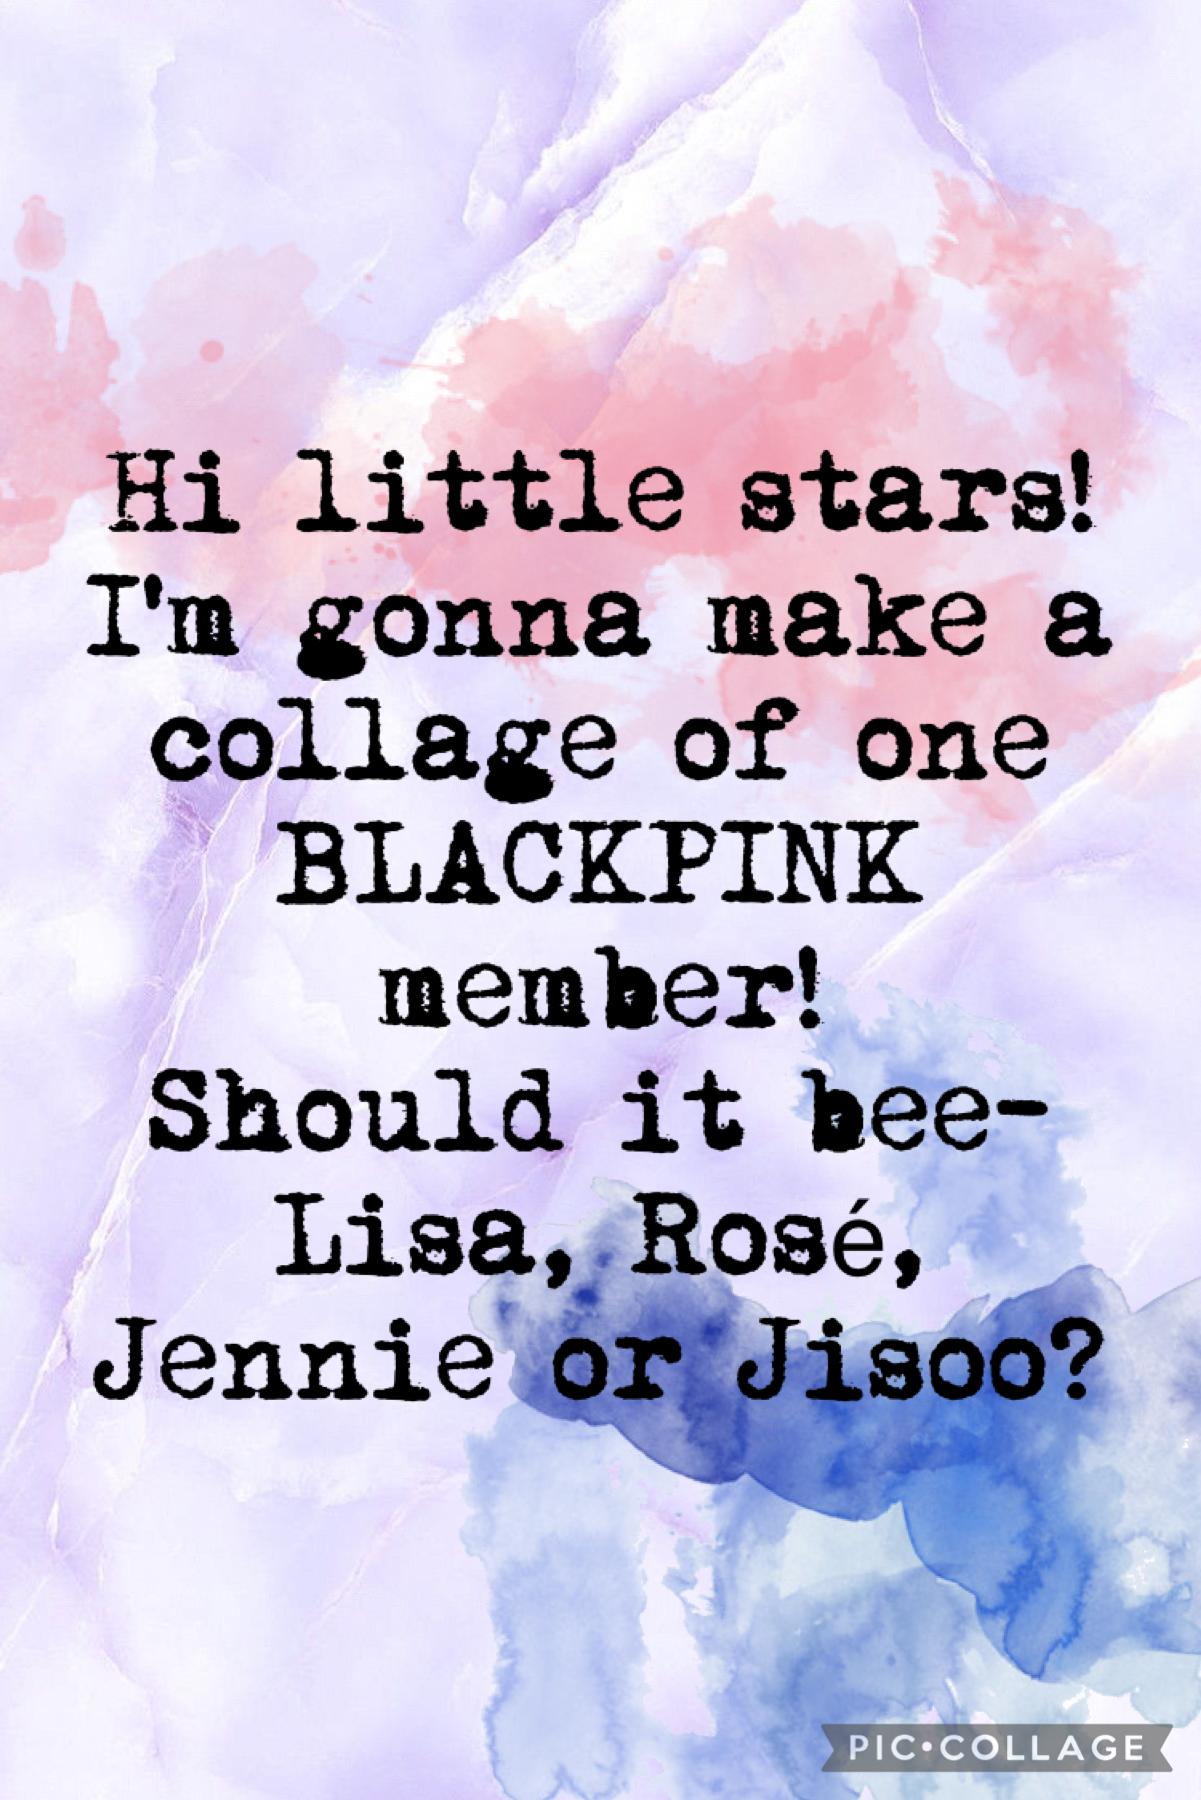 BP in your area!
Who do you like more- Lisa, Rosé, Jennie or Jisoo?